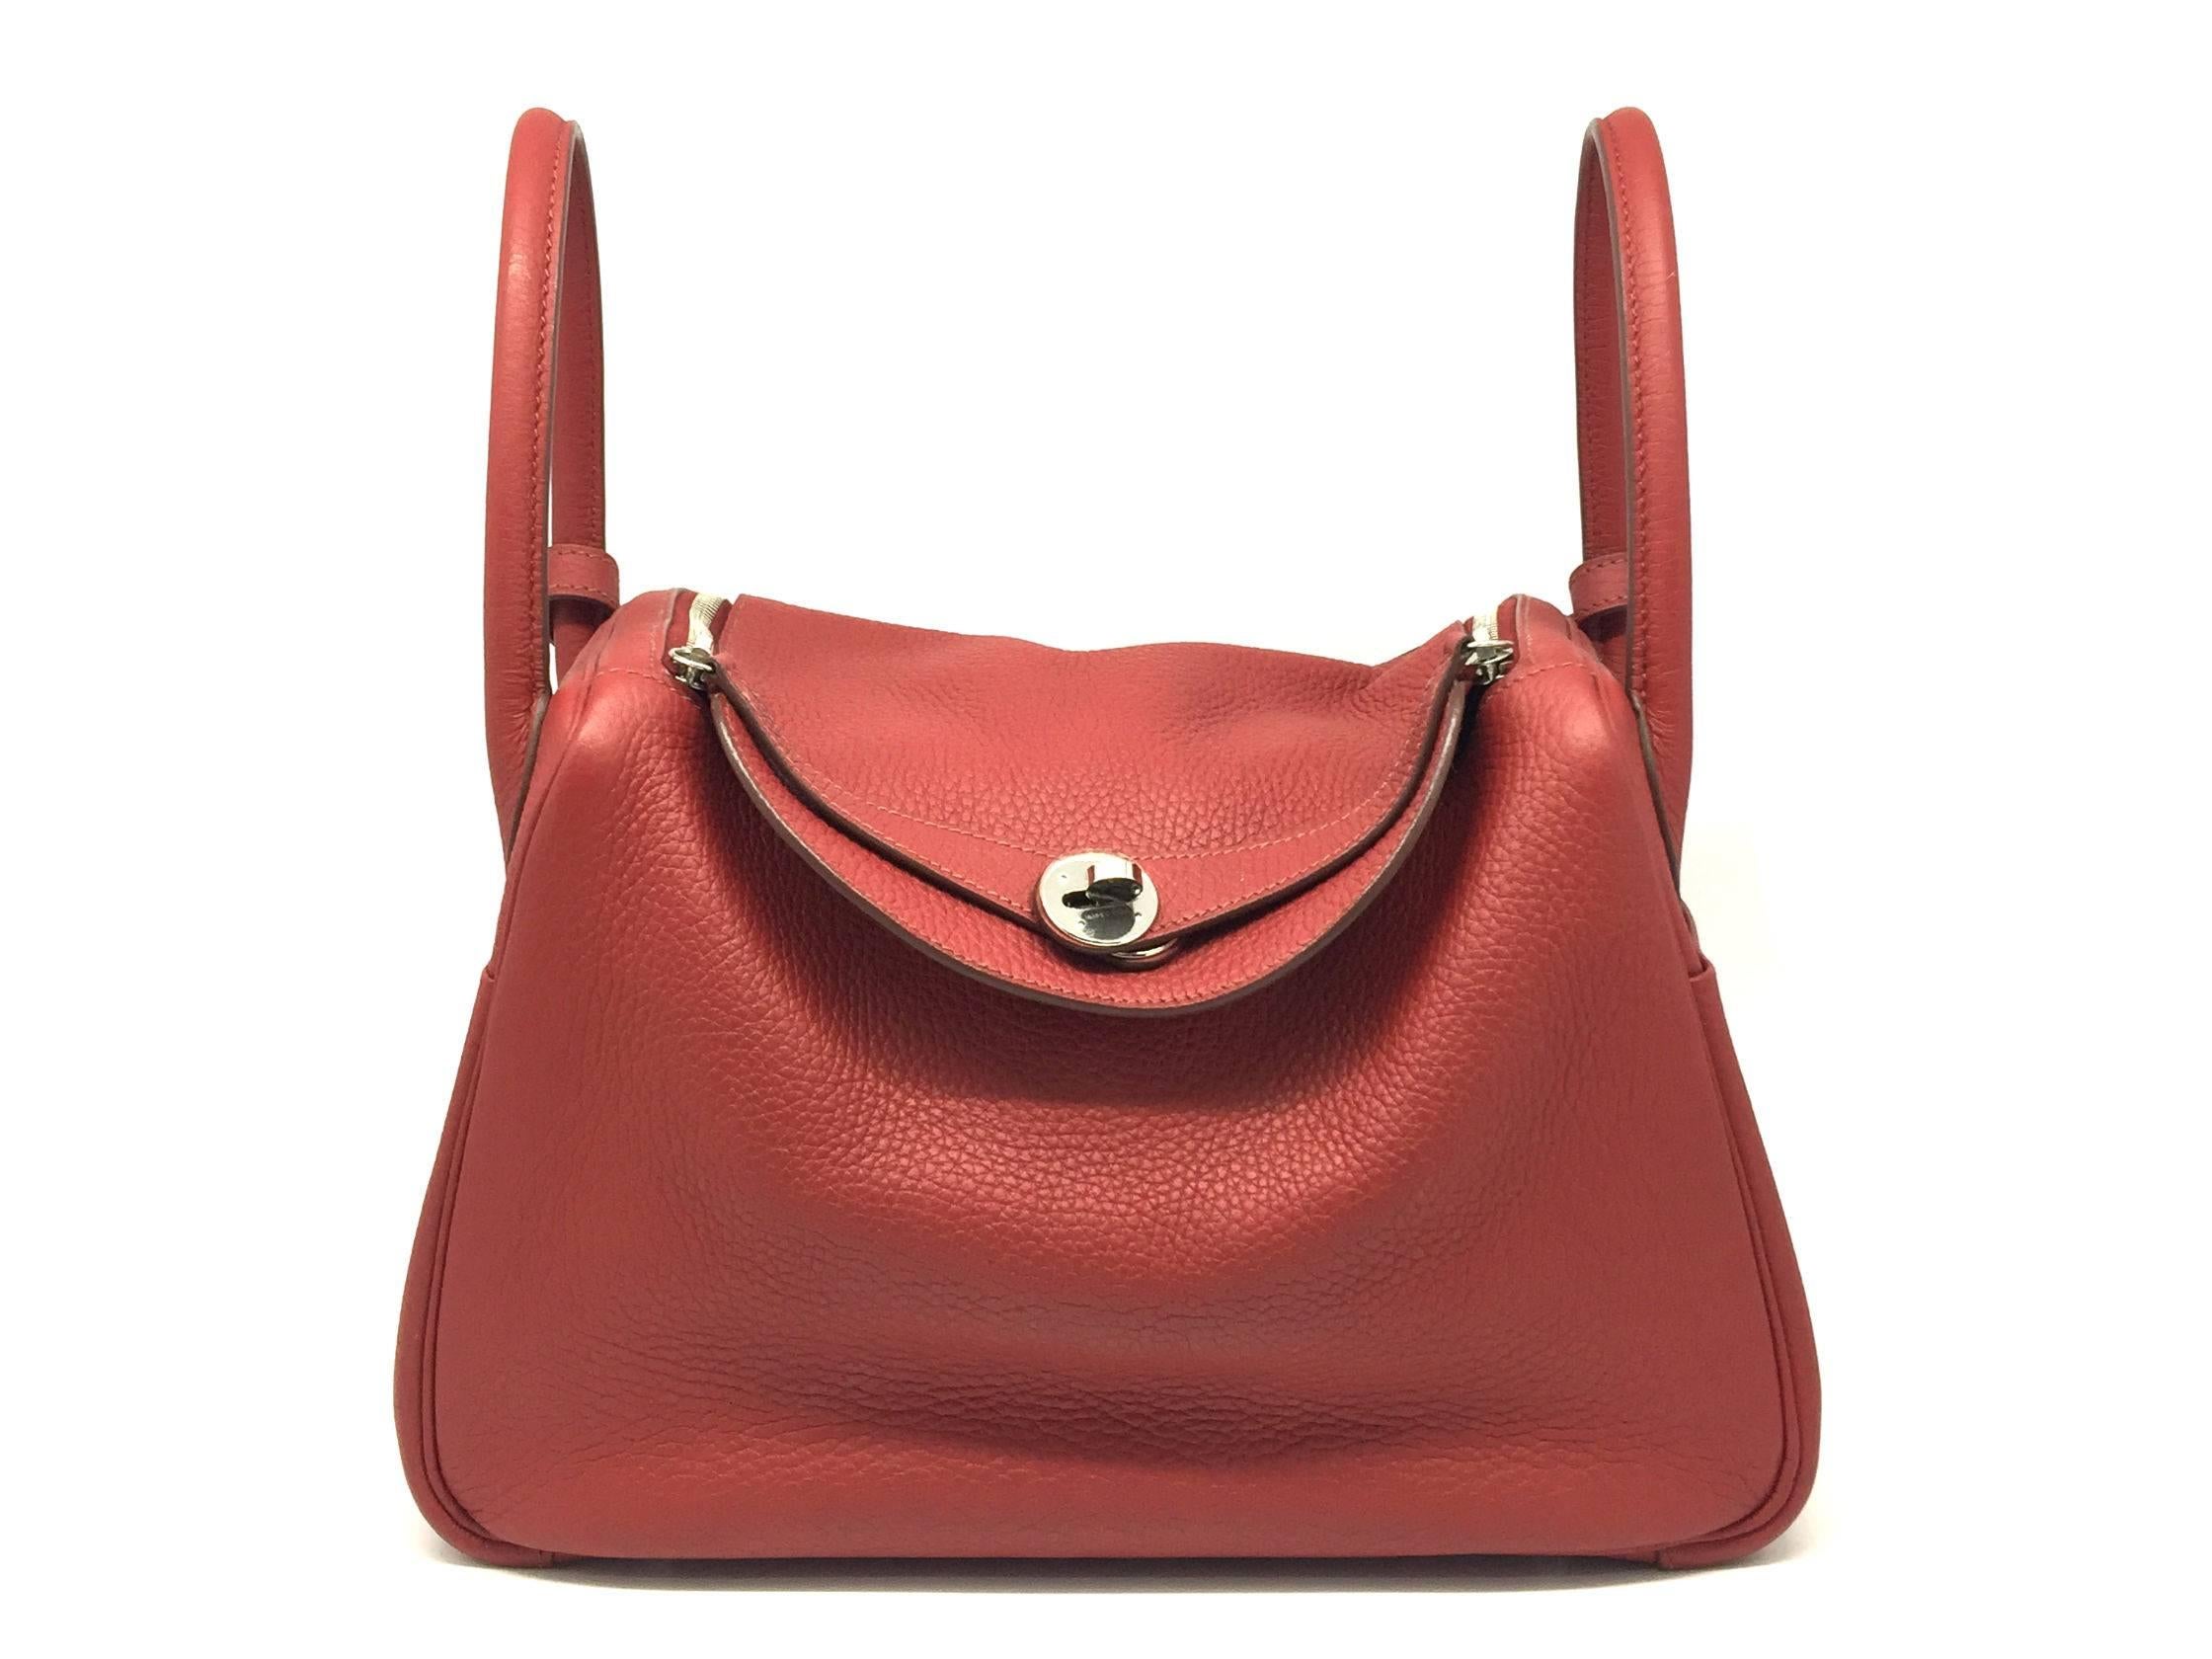 Color: Red / Rouge H (designer color)
Material: Clemence Leather

Condition:
Rank A
Overall: Good, few minor defects
Surface: Minor Scratches
Corners: Minor Scratches
Edges: Minor Scratches
Handles/Straps: Minor Scratches
Hardware: Minor